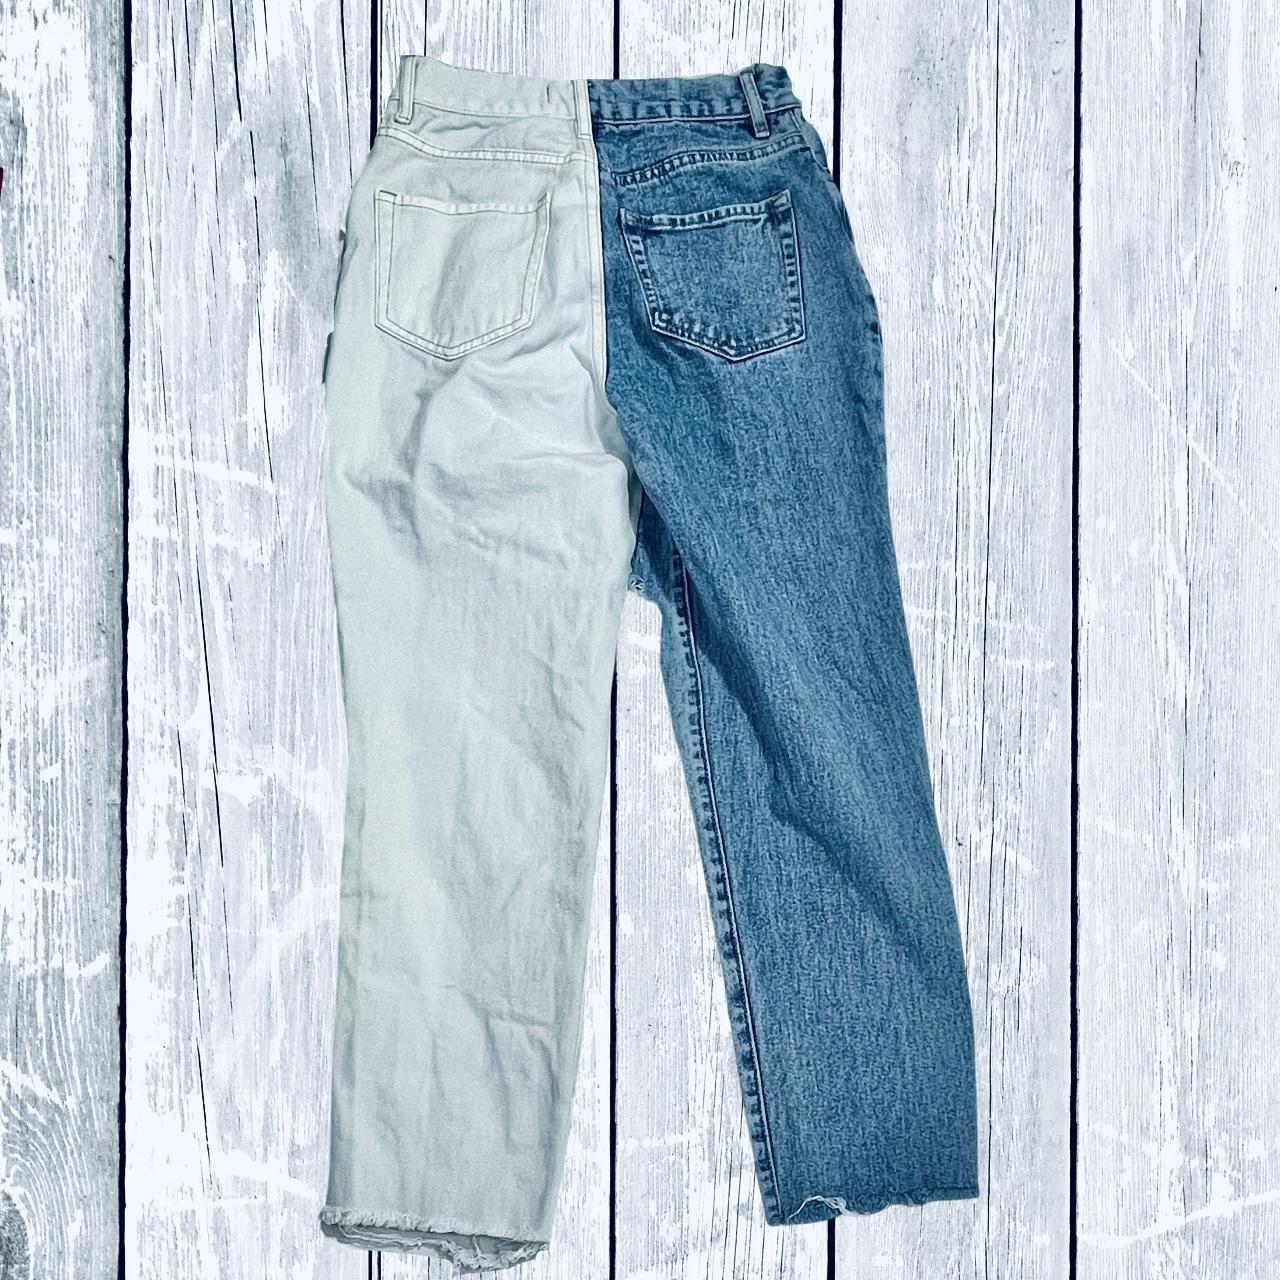 PacSun Women's White and Blue Jeans (3)